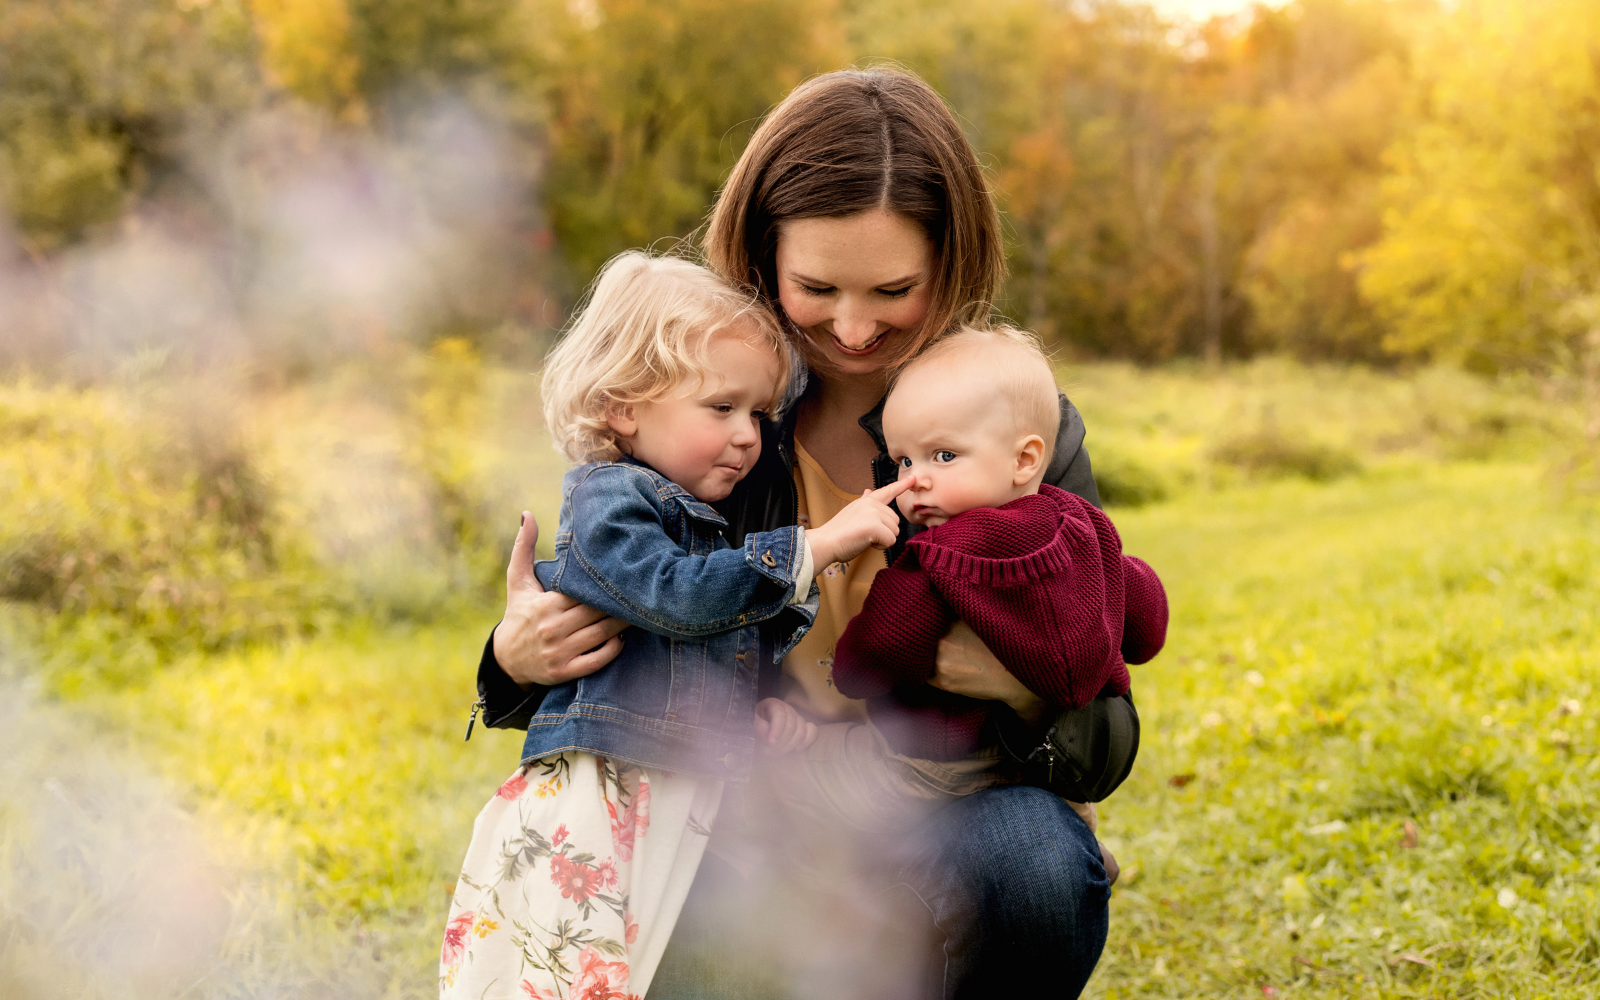 As a Certified Intuitive Eating Counsellor, Registered Dietitian, and mom of two Jennifer Neale RD teaches you how to nourish your body so you can spend less time worrying about food and more time enjoying your time with your kids.